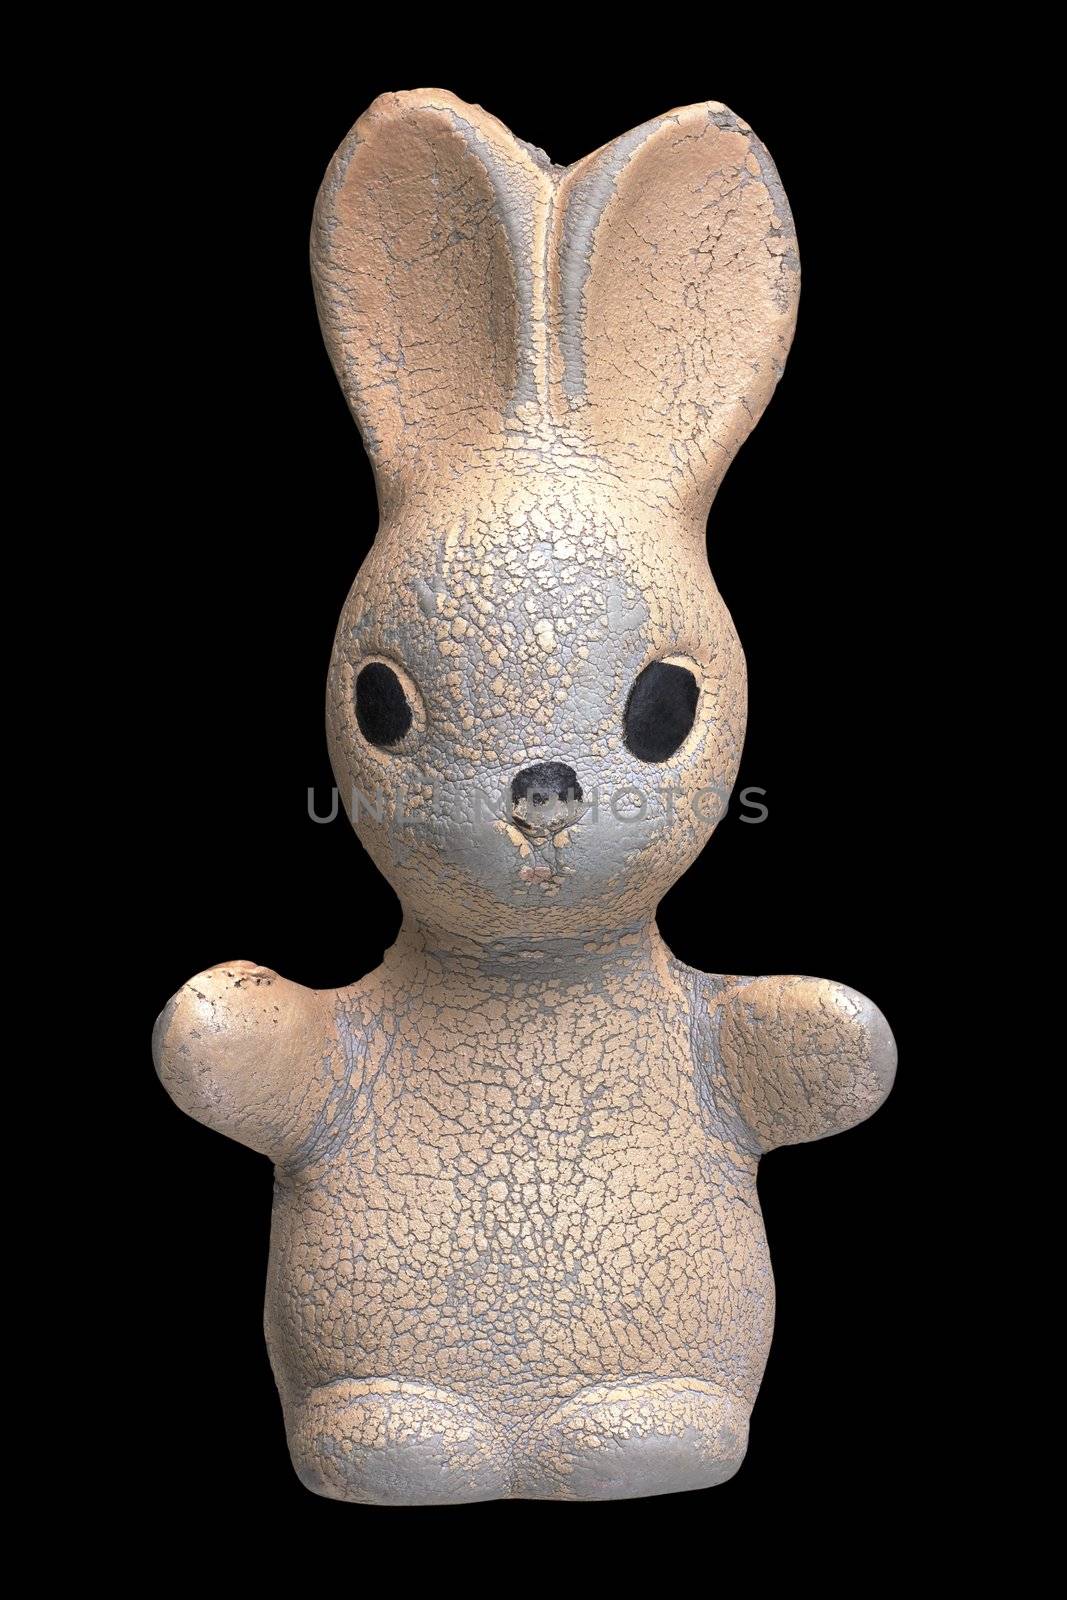 Old toy rabbit on a black background. Clipping path is included